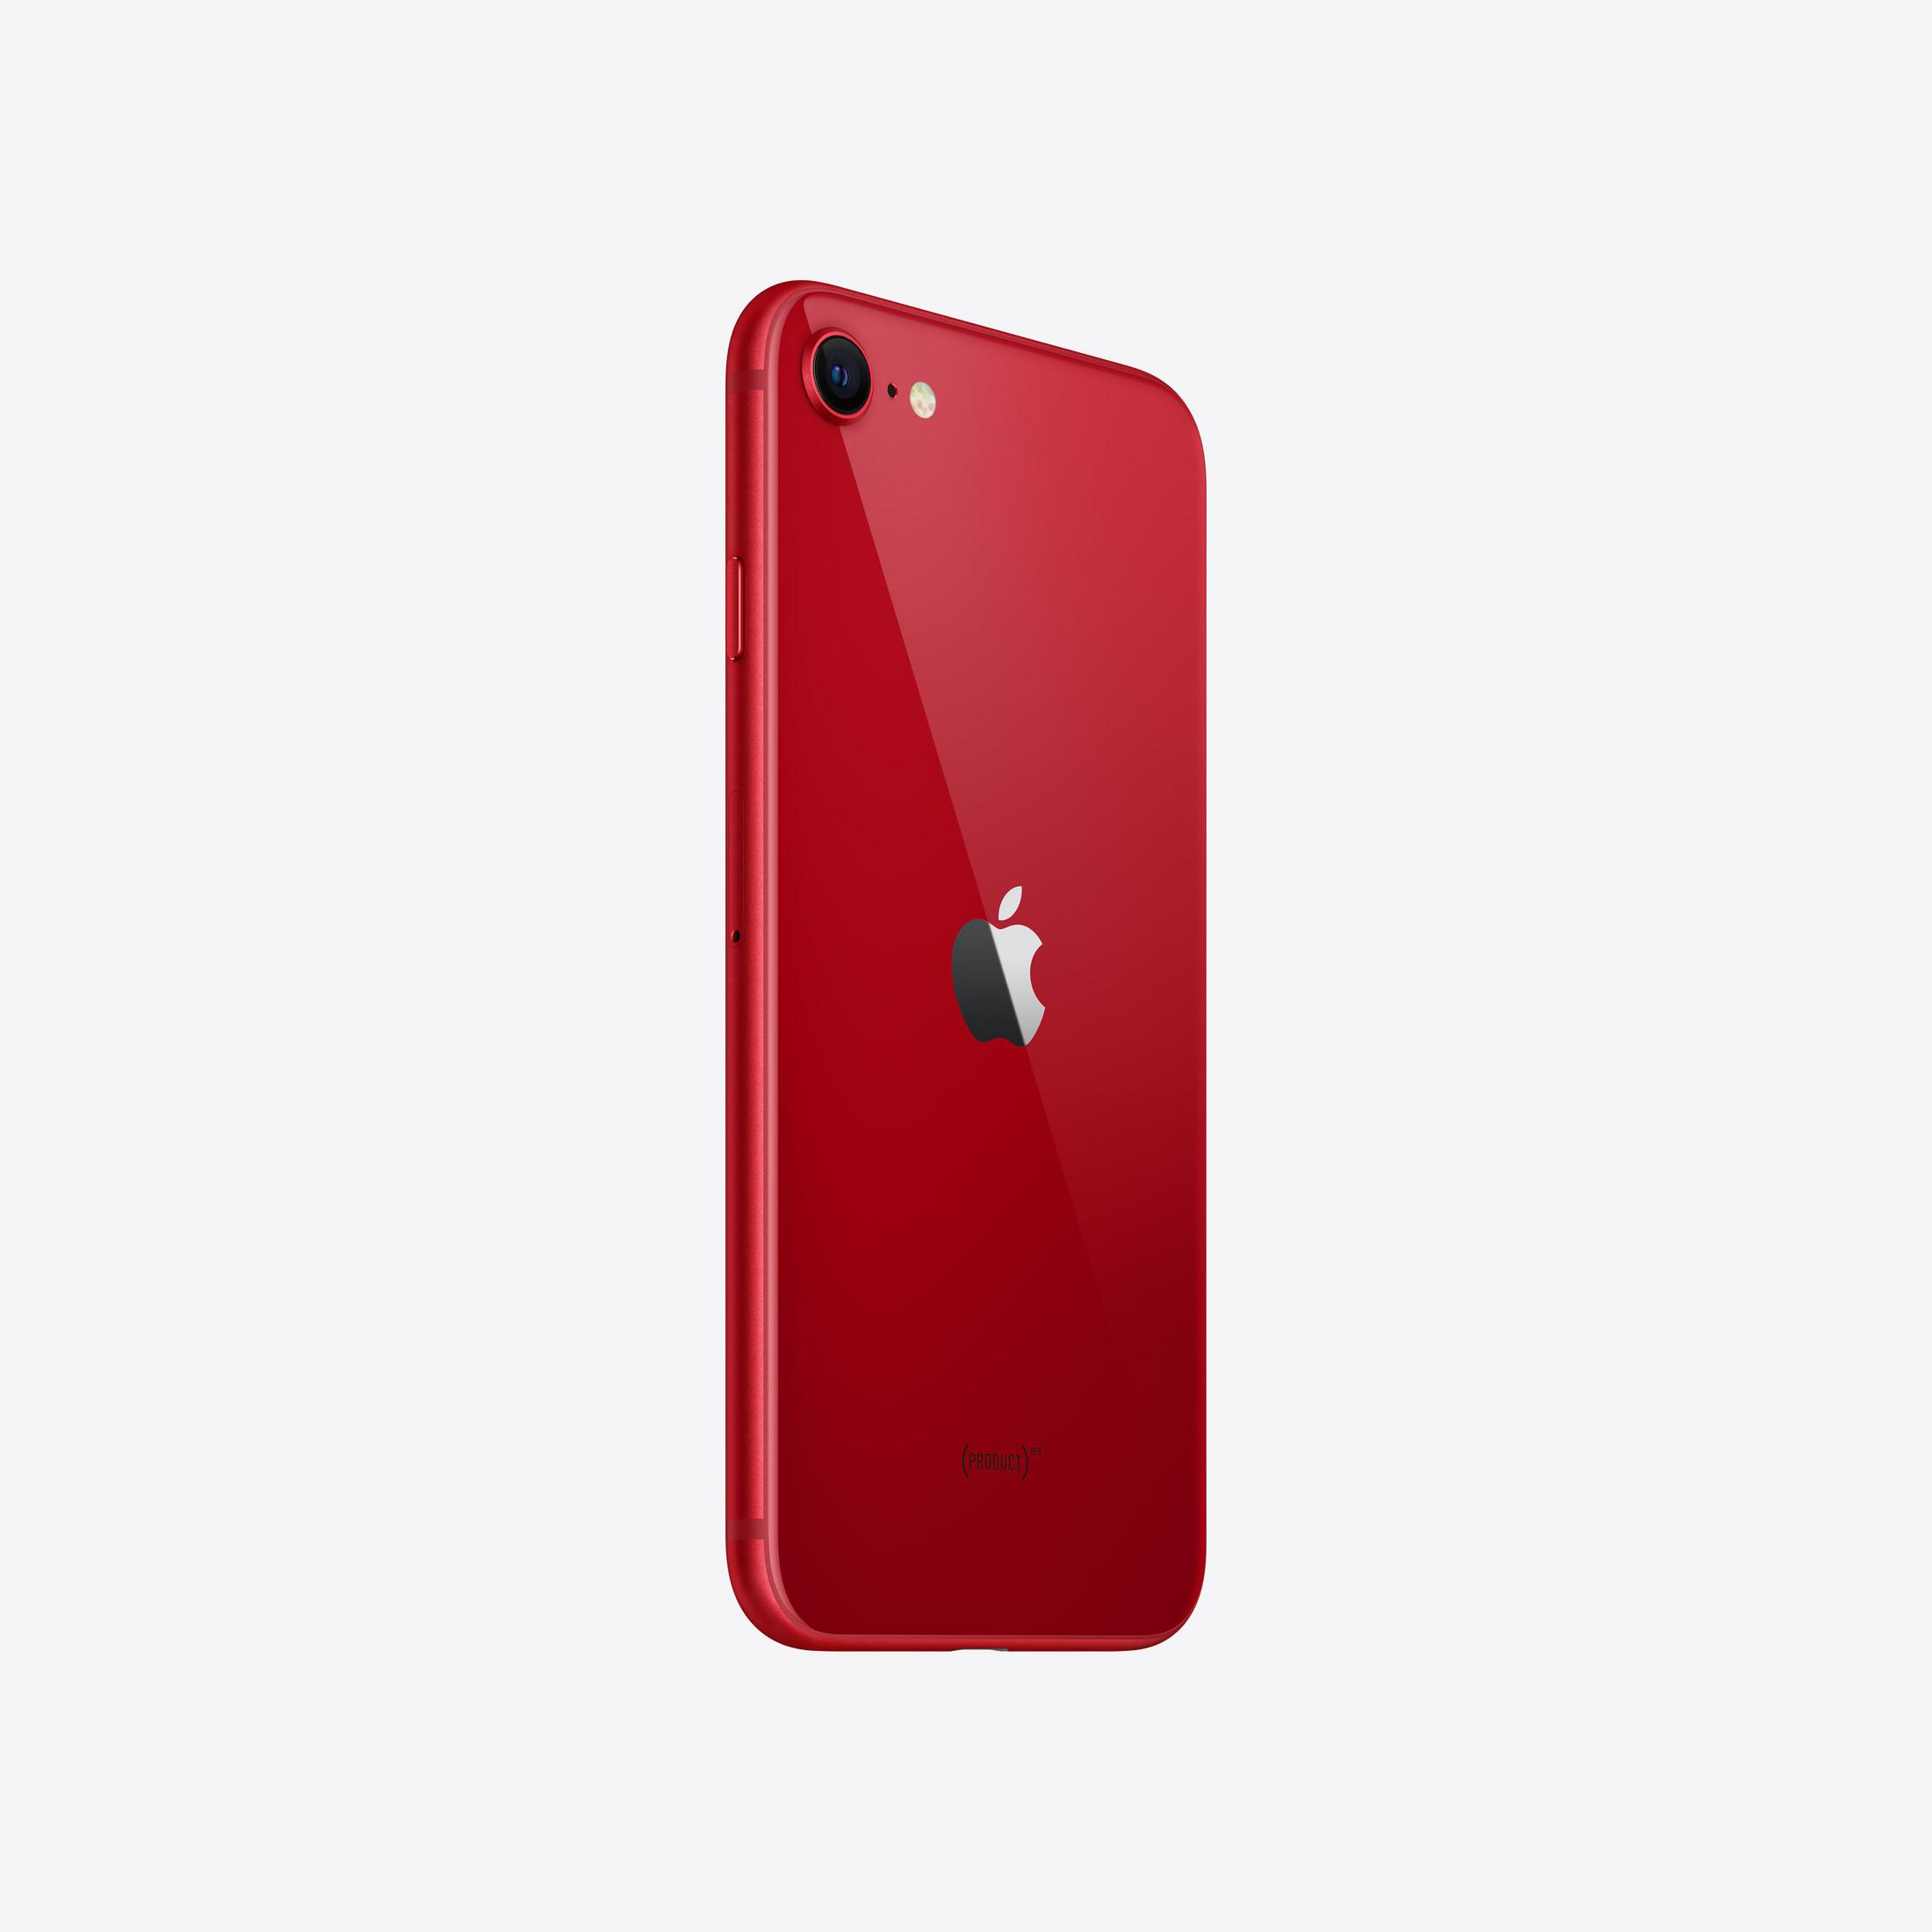 APPLE IPHONE SE Red GB 256GB 256 (PRODUCT) RED (Product)